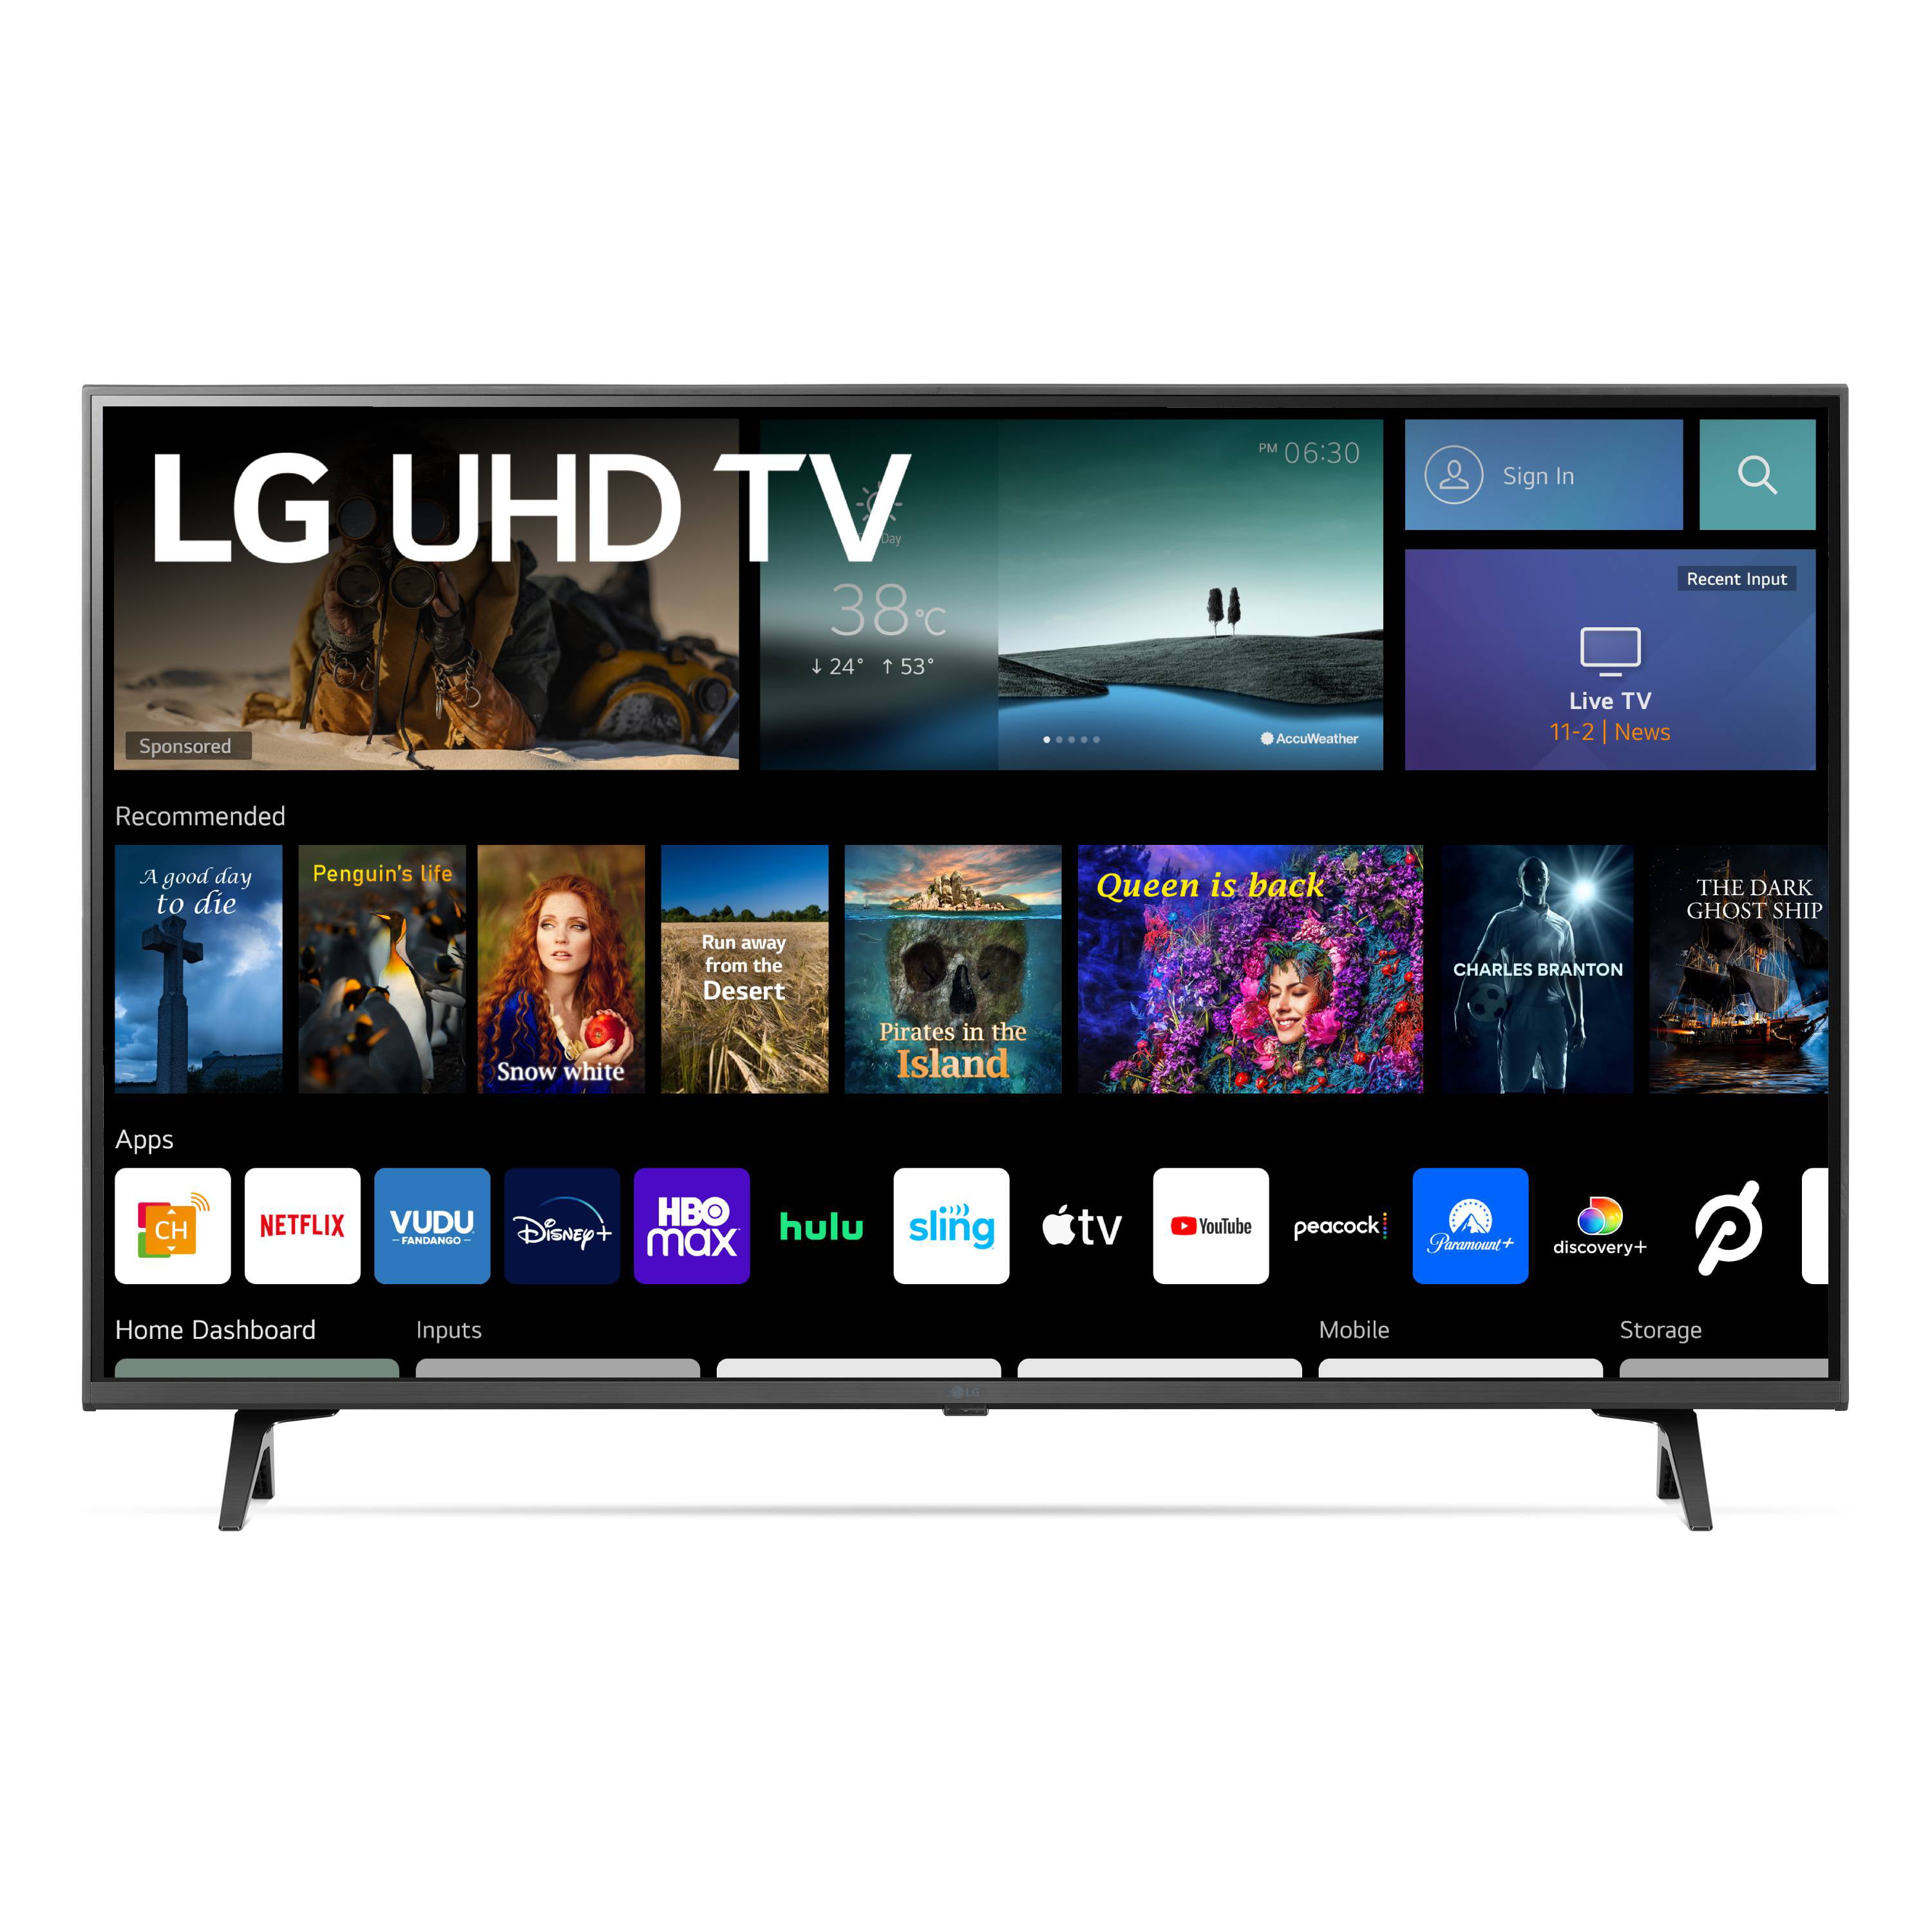 How to Change Inputs on an LG TV? 3